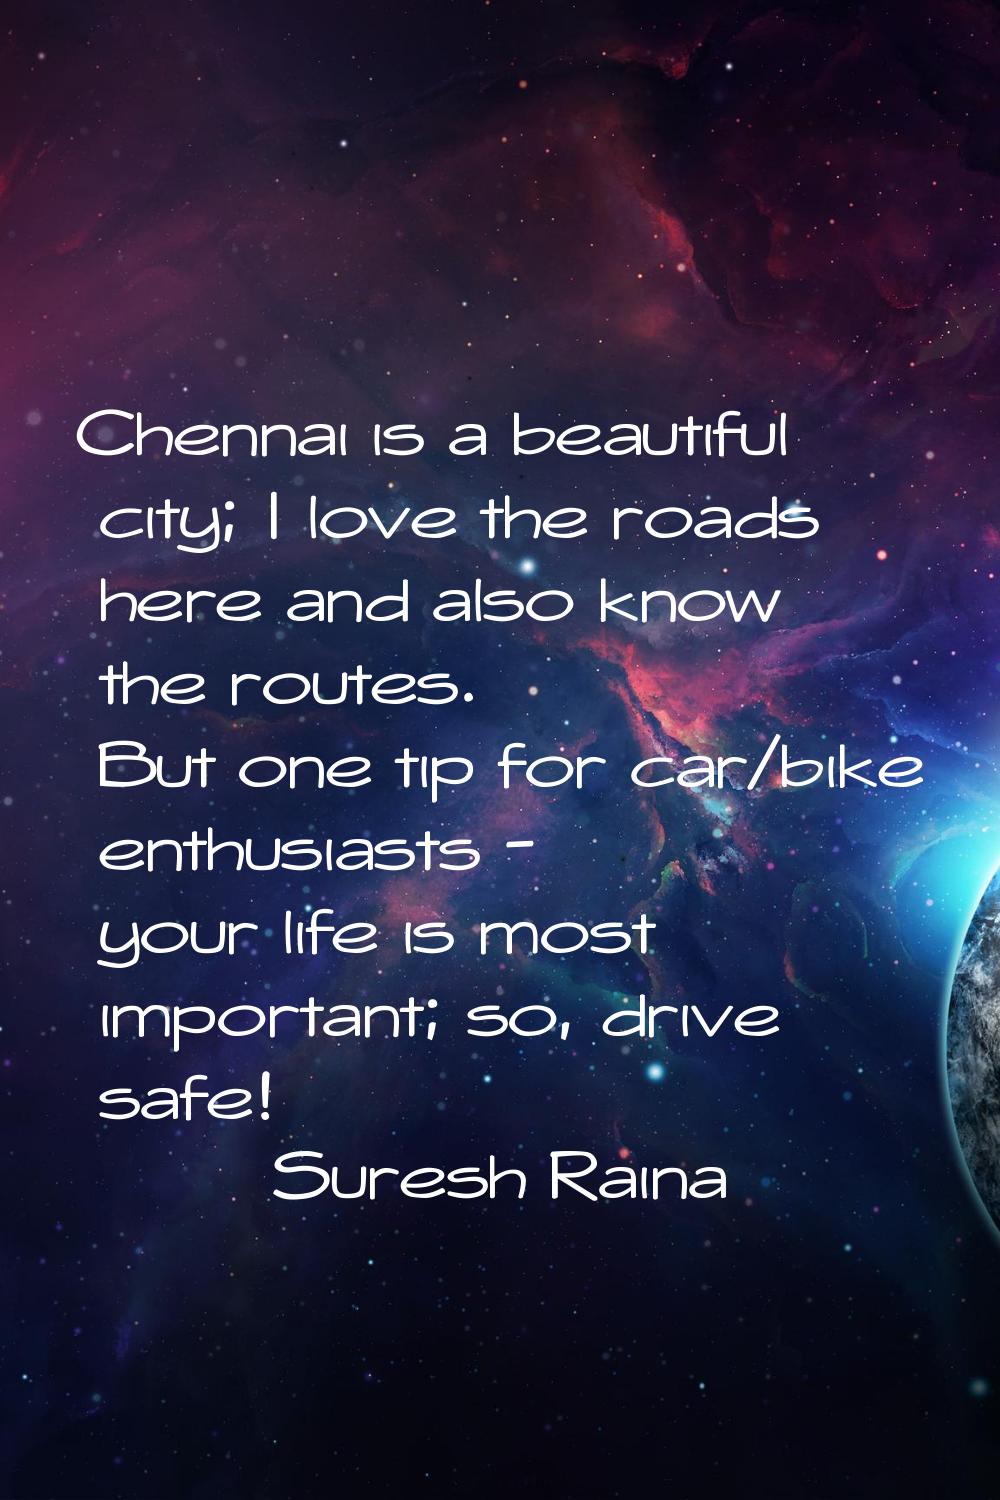 Chennai is a beautiful city; I love the roads here and also know the routes. But one tip for car/bi